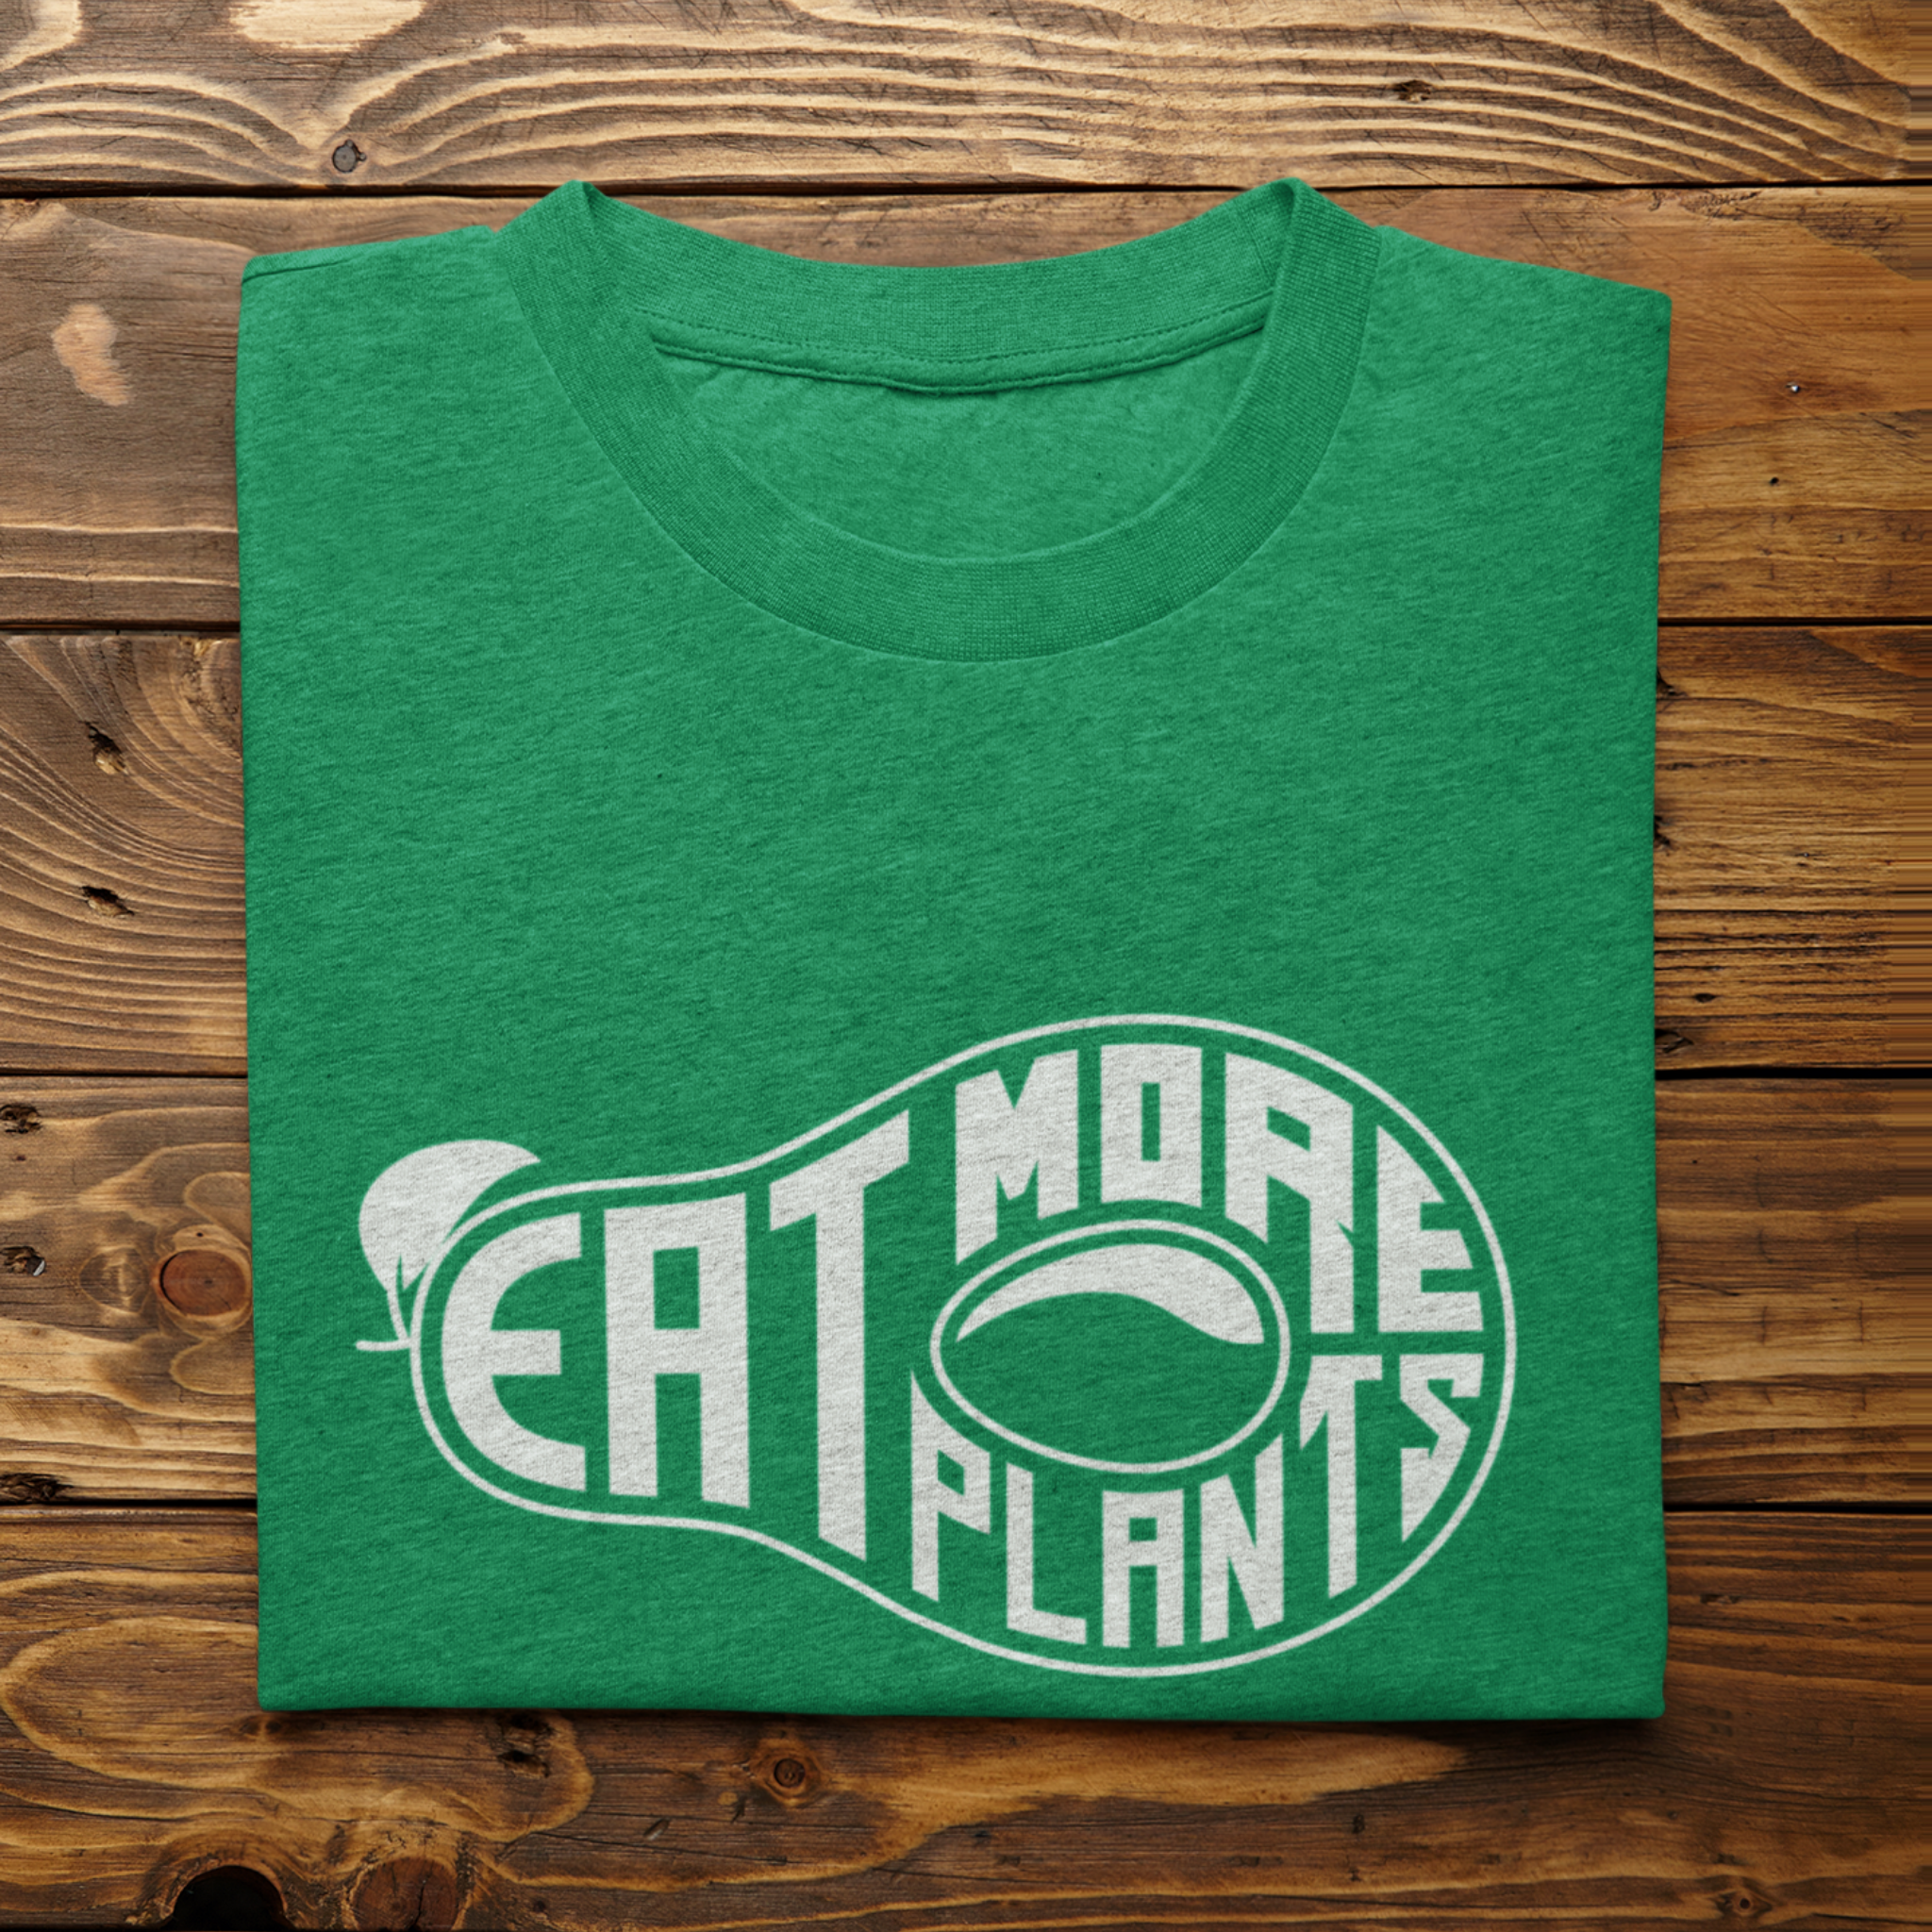 Eat Plants, Save Our Planet Tee – Plant Eater Apparel